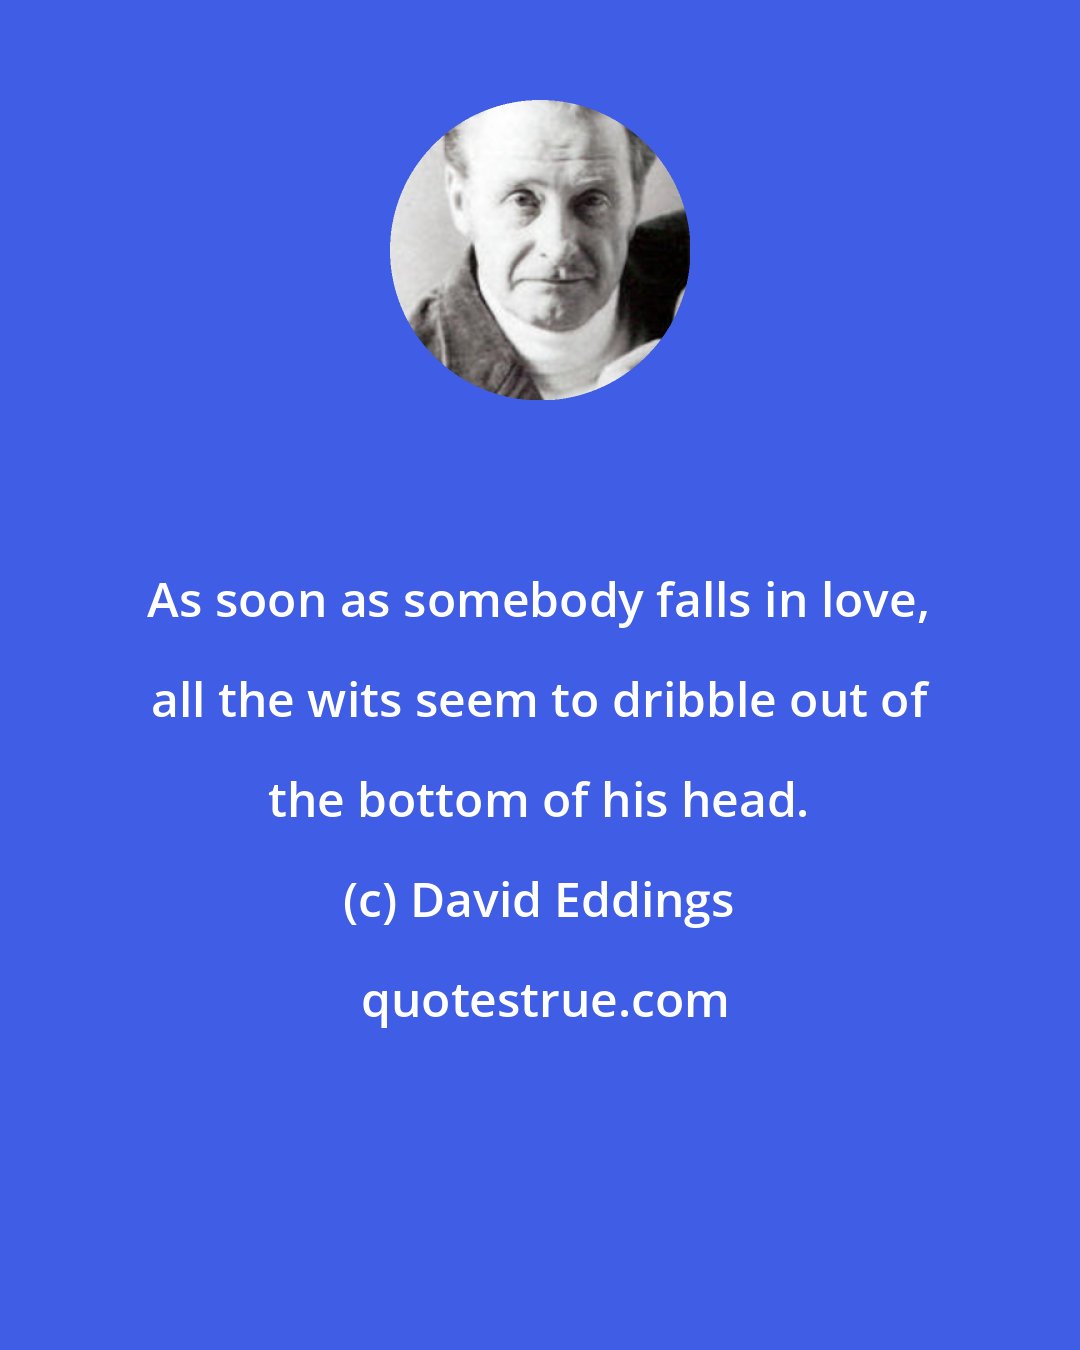 David Eddings: As soon as somebody falls in love, all the wits seem to dribble out of the bottom of his head.